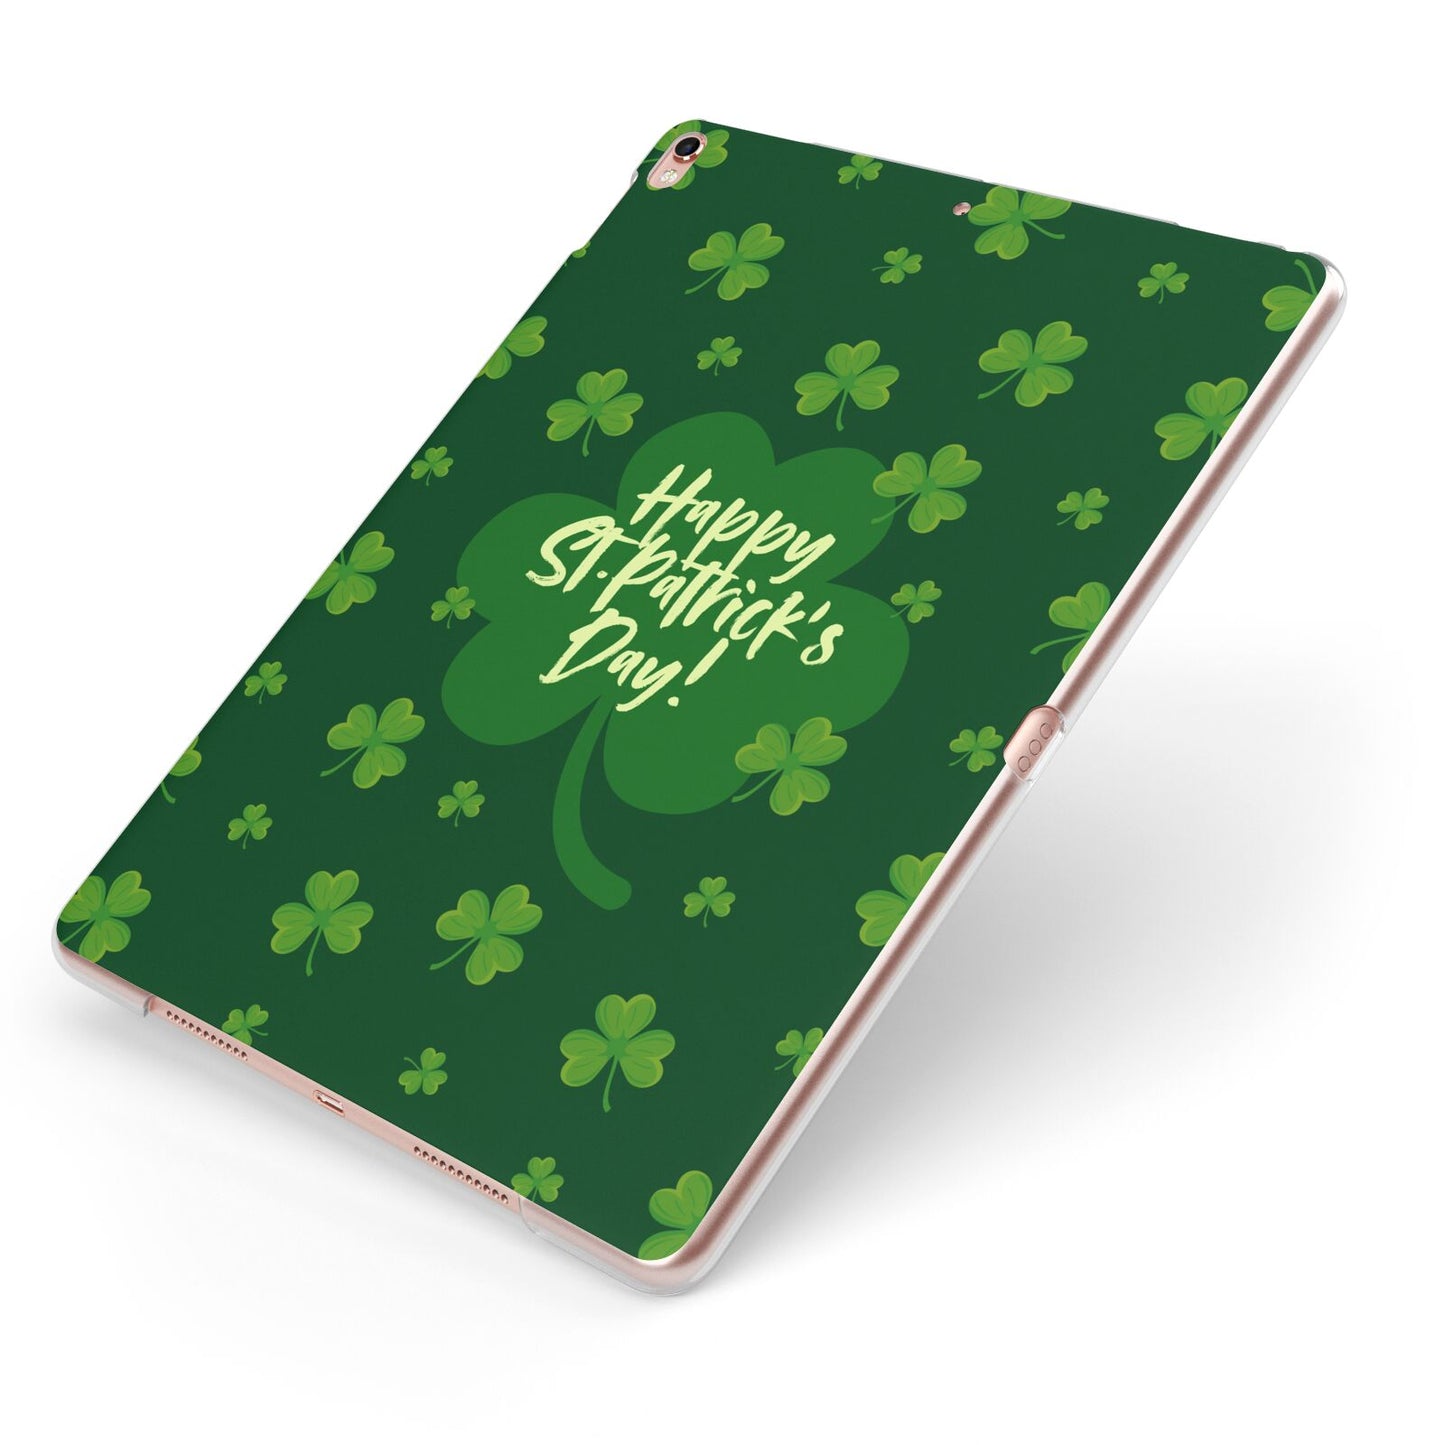 Happy St Patricks Day Apple iPad Case on Rose Gold iPad Side View